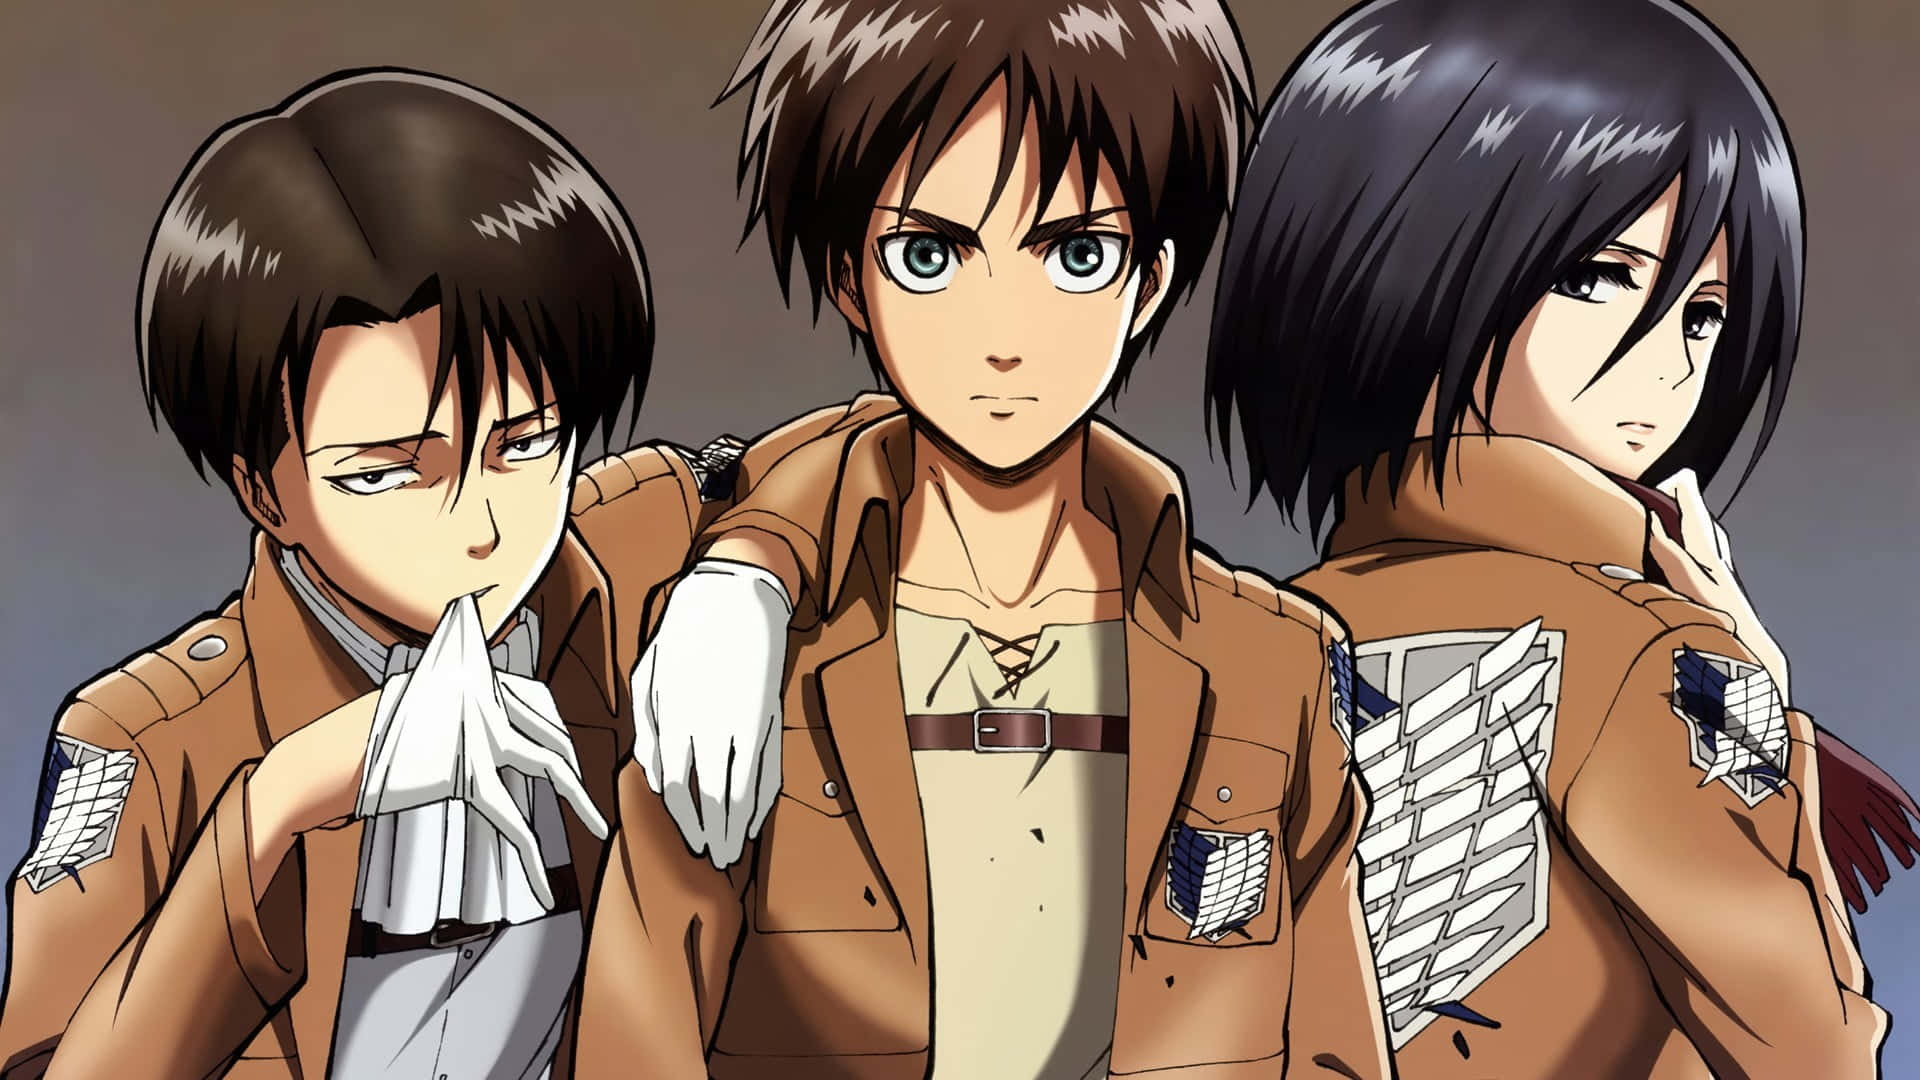 Prepare to journey into an epic adventure of grand proportions with Attack On Titan Season 1. Wallpaper